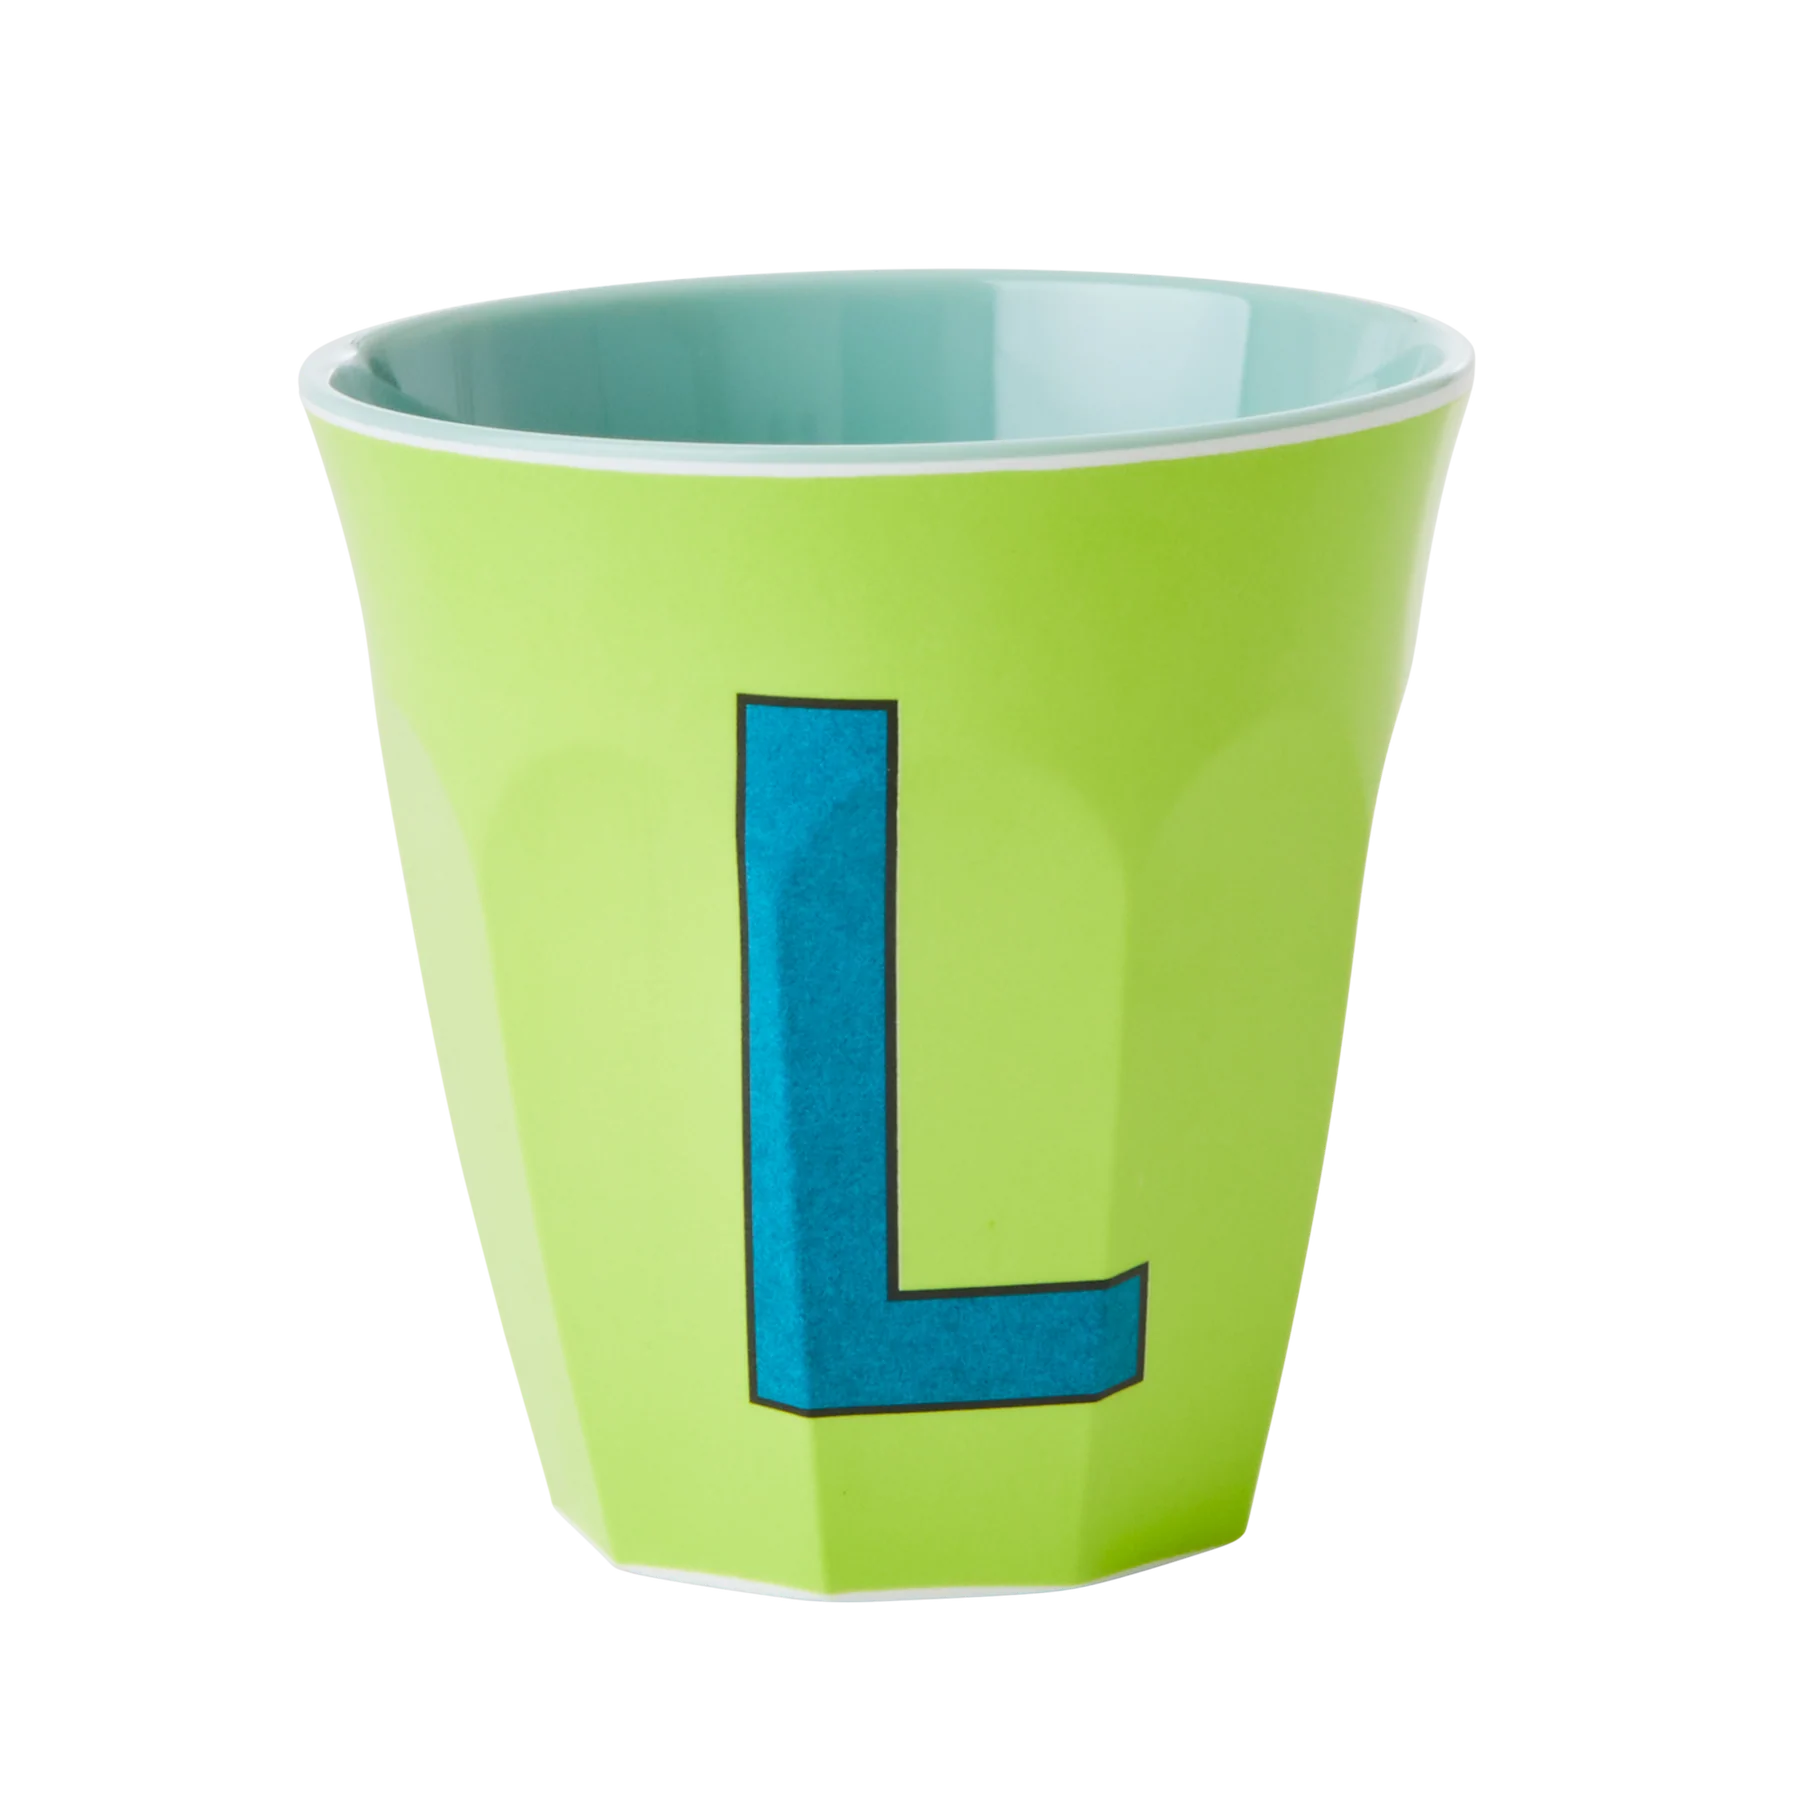 'L' Lime Green Melamine Cup - Rice DK